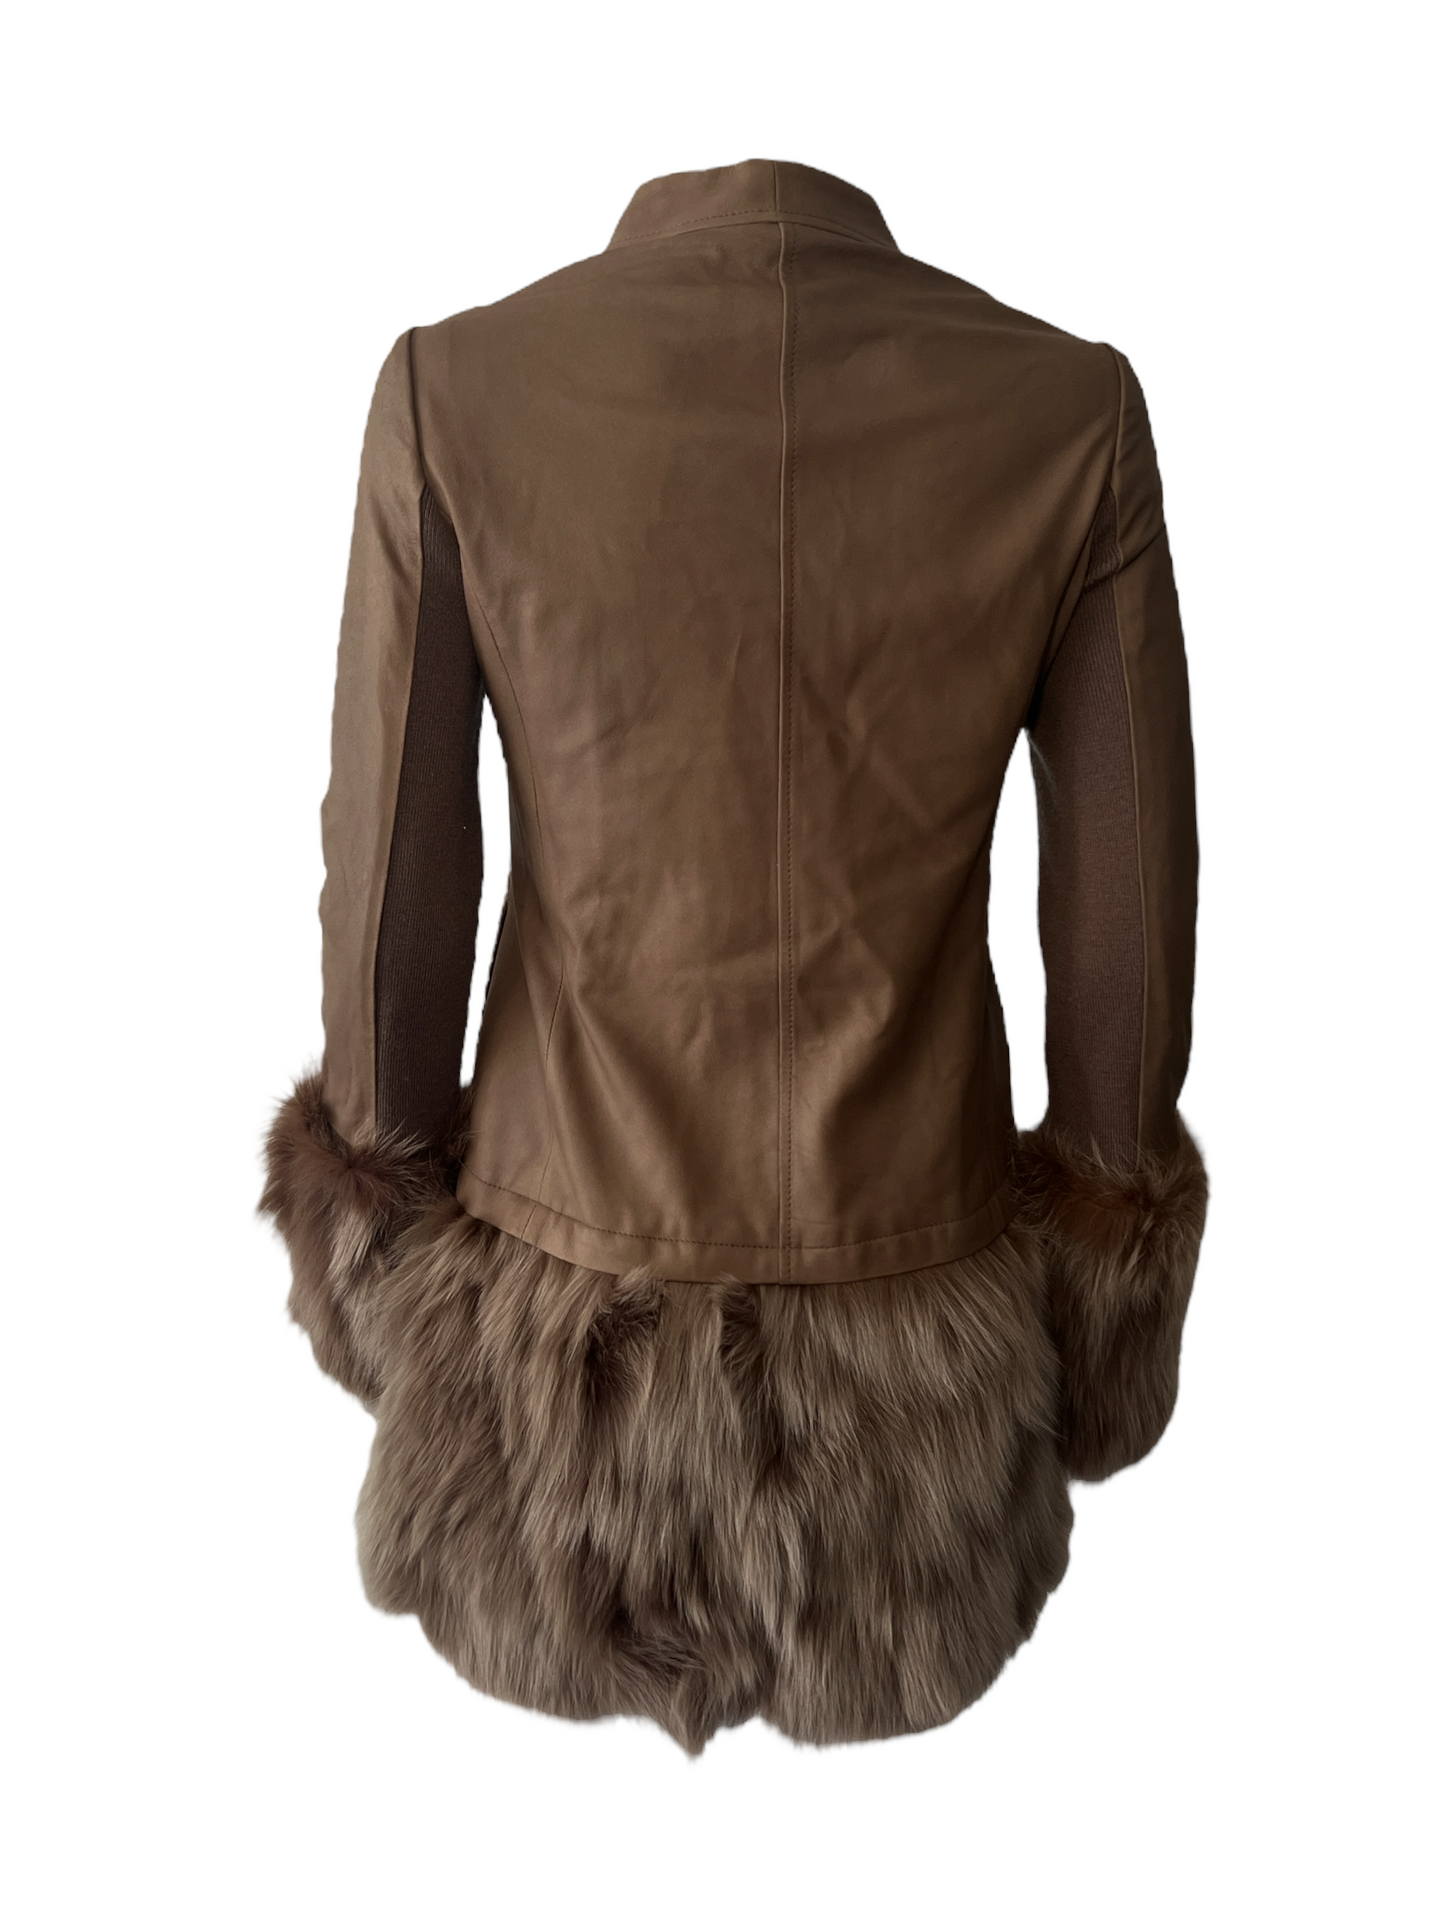 Taupe Leather Jacket with Fur Trim